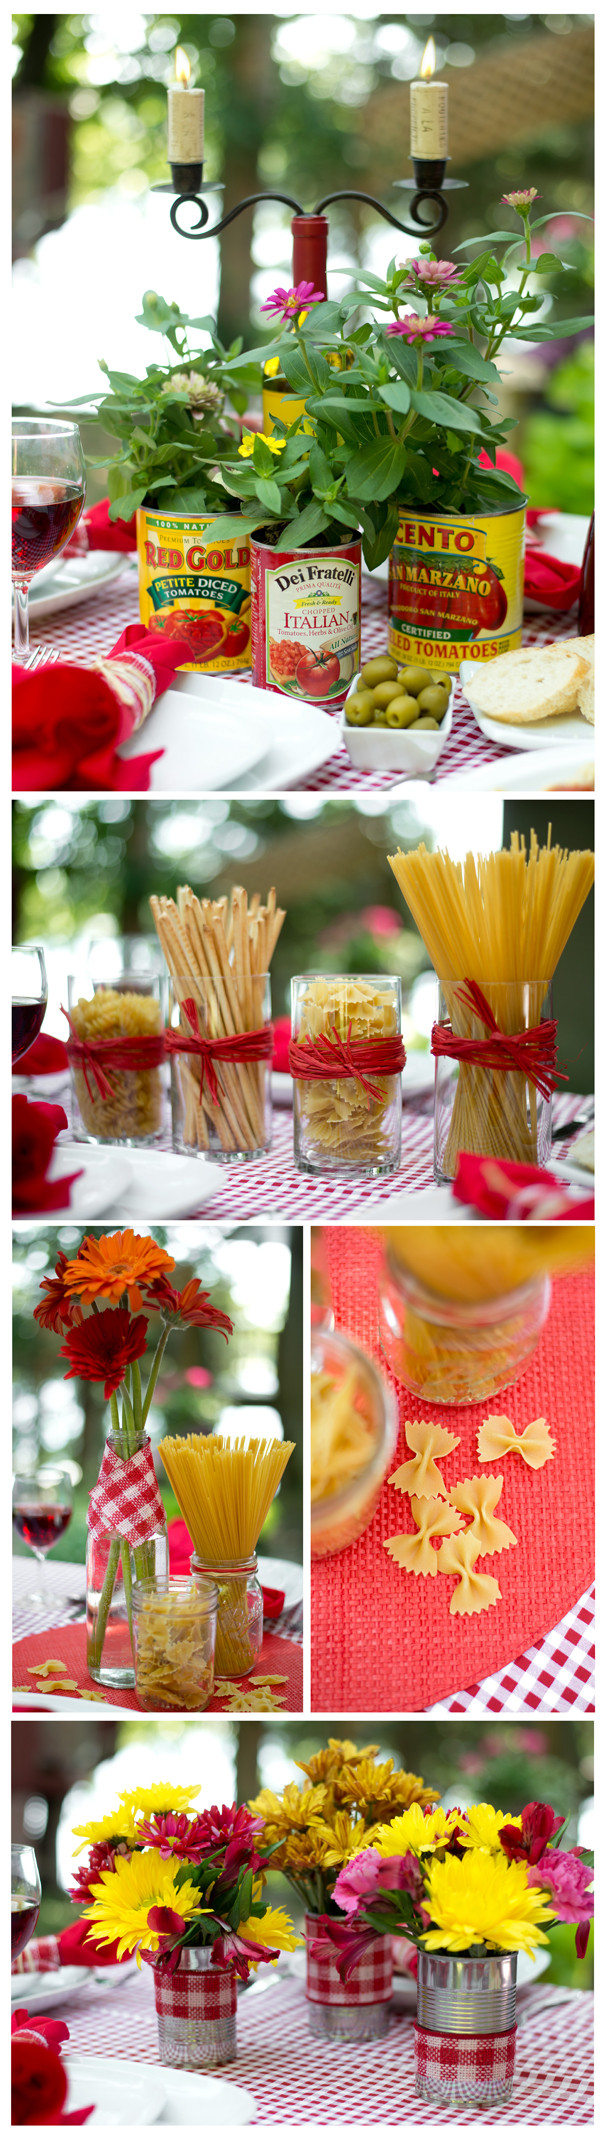 Centerpiece Ideas For Dinner Party
 Bud Centerpiece Ideas for an Italian Dinner Theme